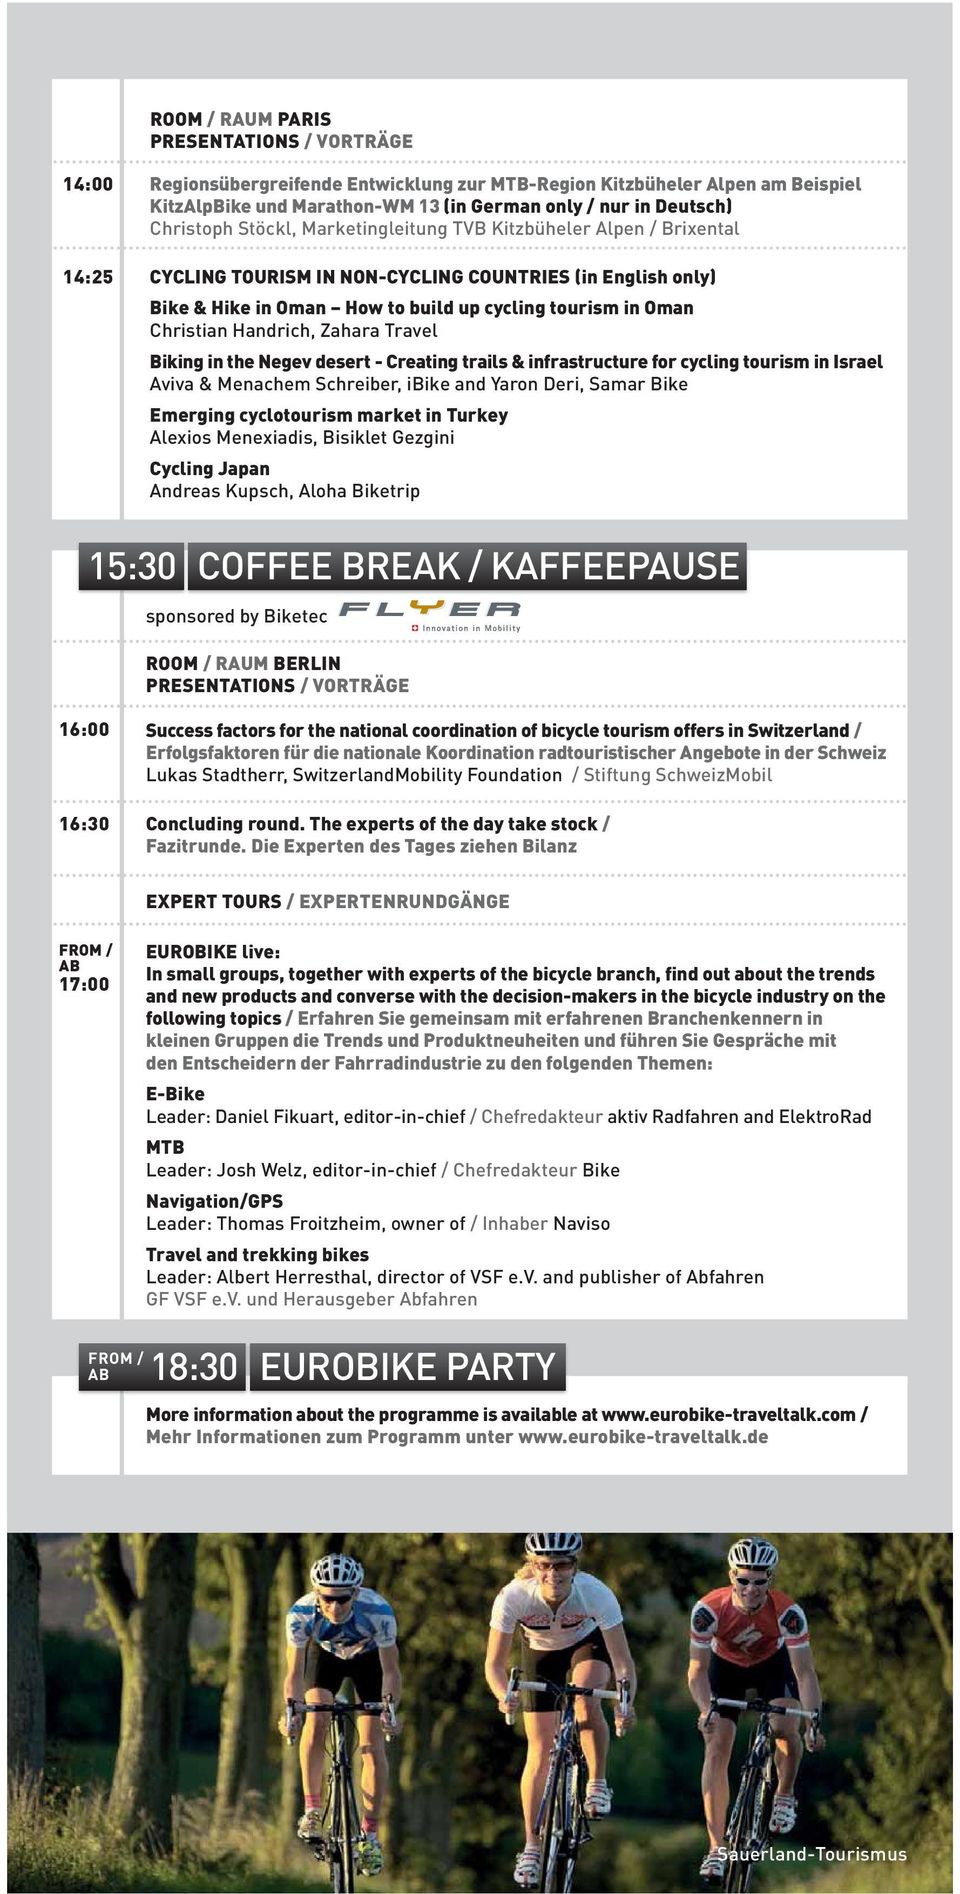 infrastructure for cycling tourism in Israel Emerging cyclotourism market in Turkey Cycling Japan Andreas Kupsch, Aloha Biketrip 15:30 COFFEE BREAK / KAFFEEPAUSE sponsored by Biketec ROOM / RAUM